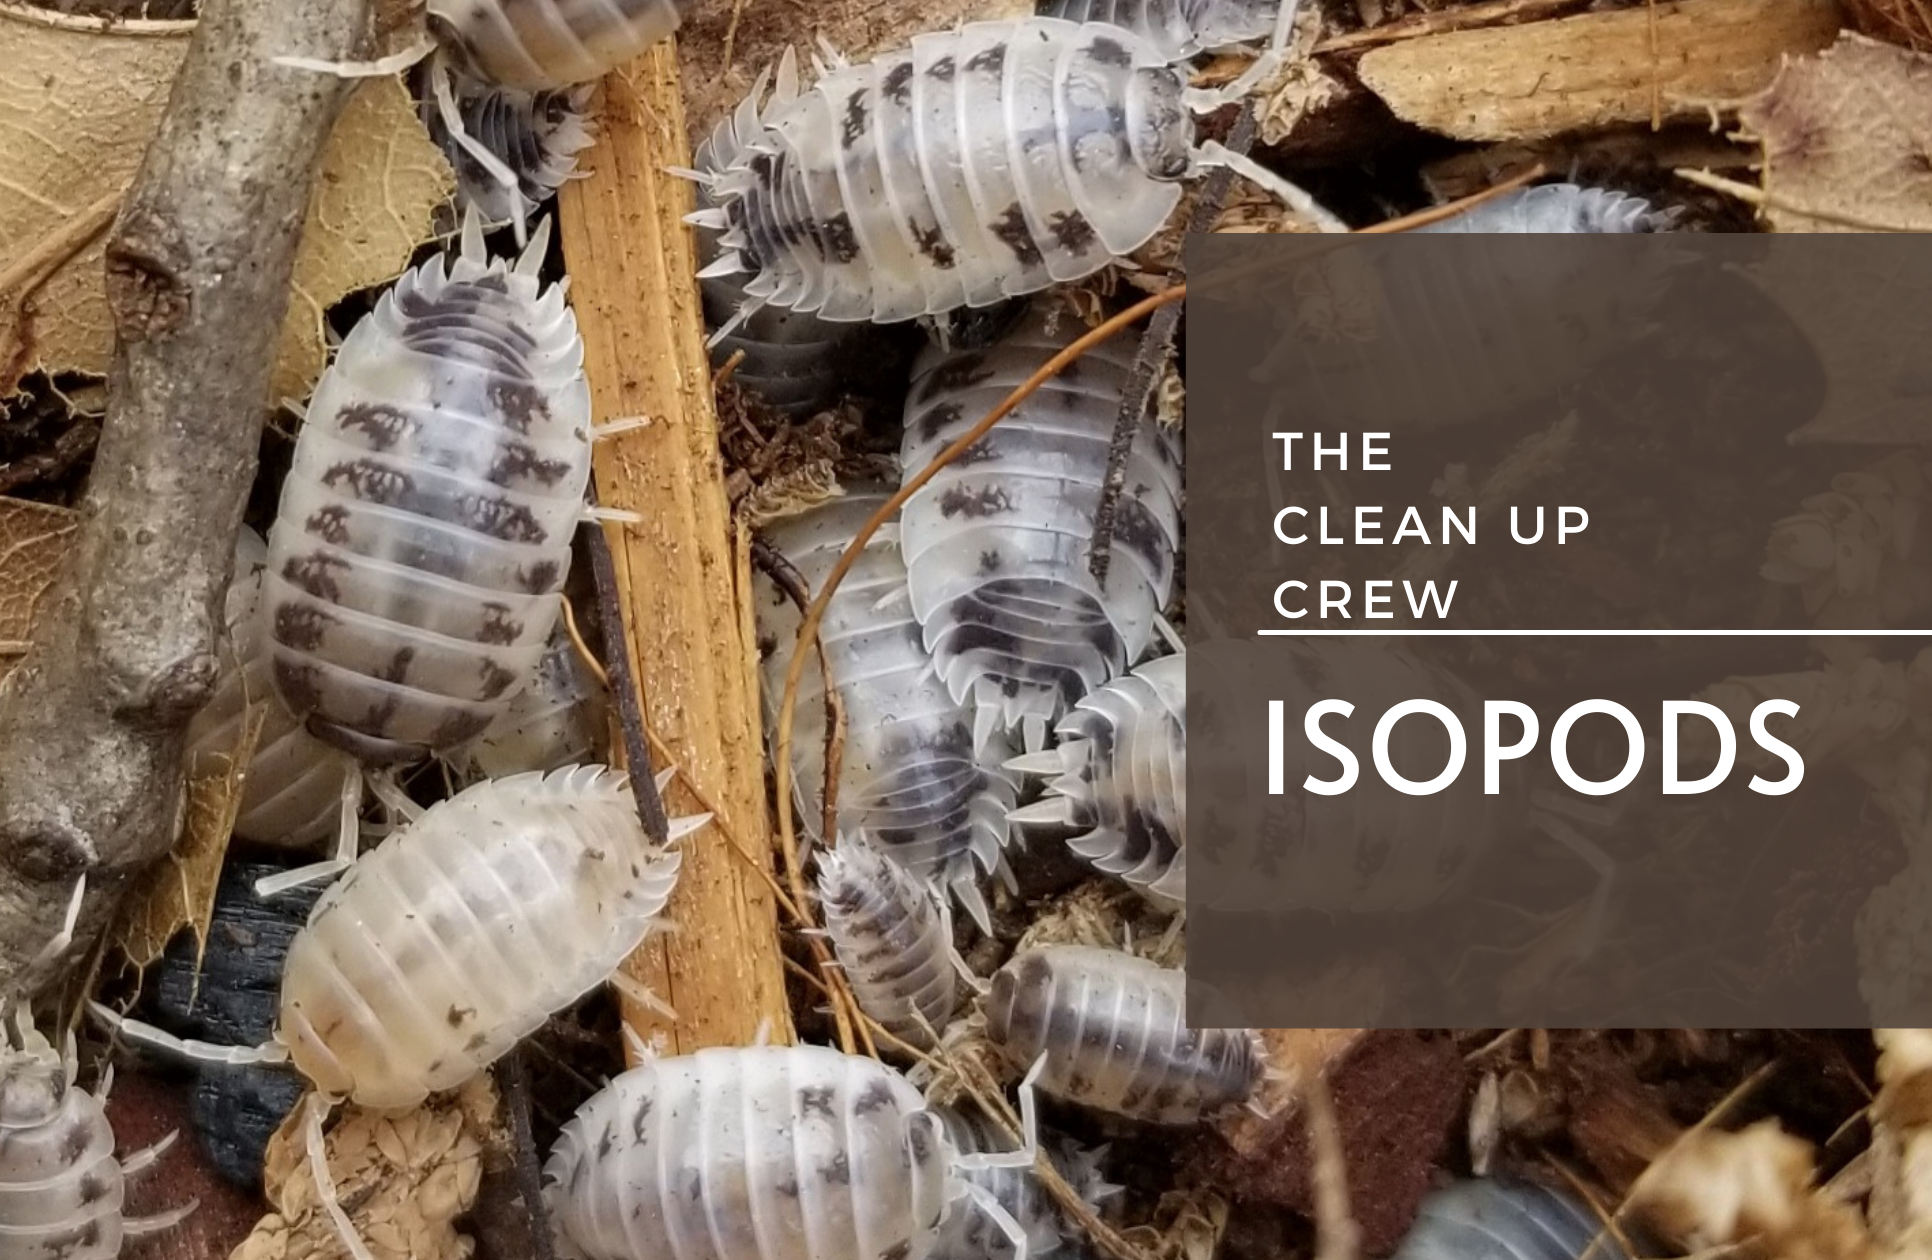 1490193212601063-isopods-16288676021001.png